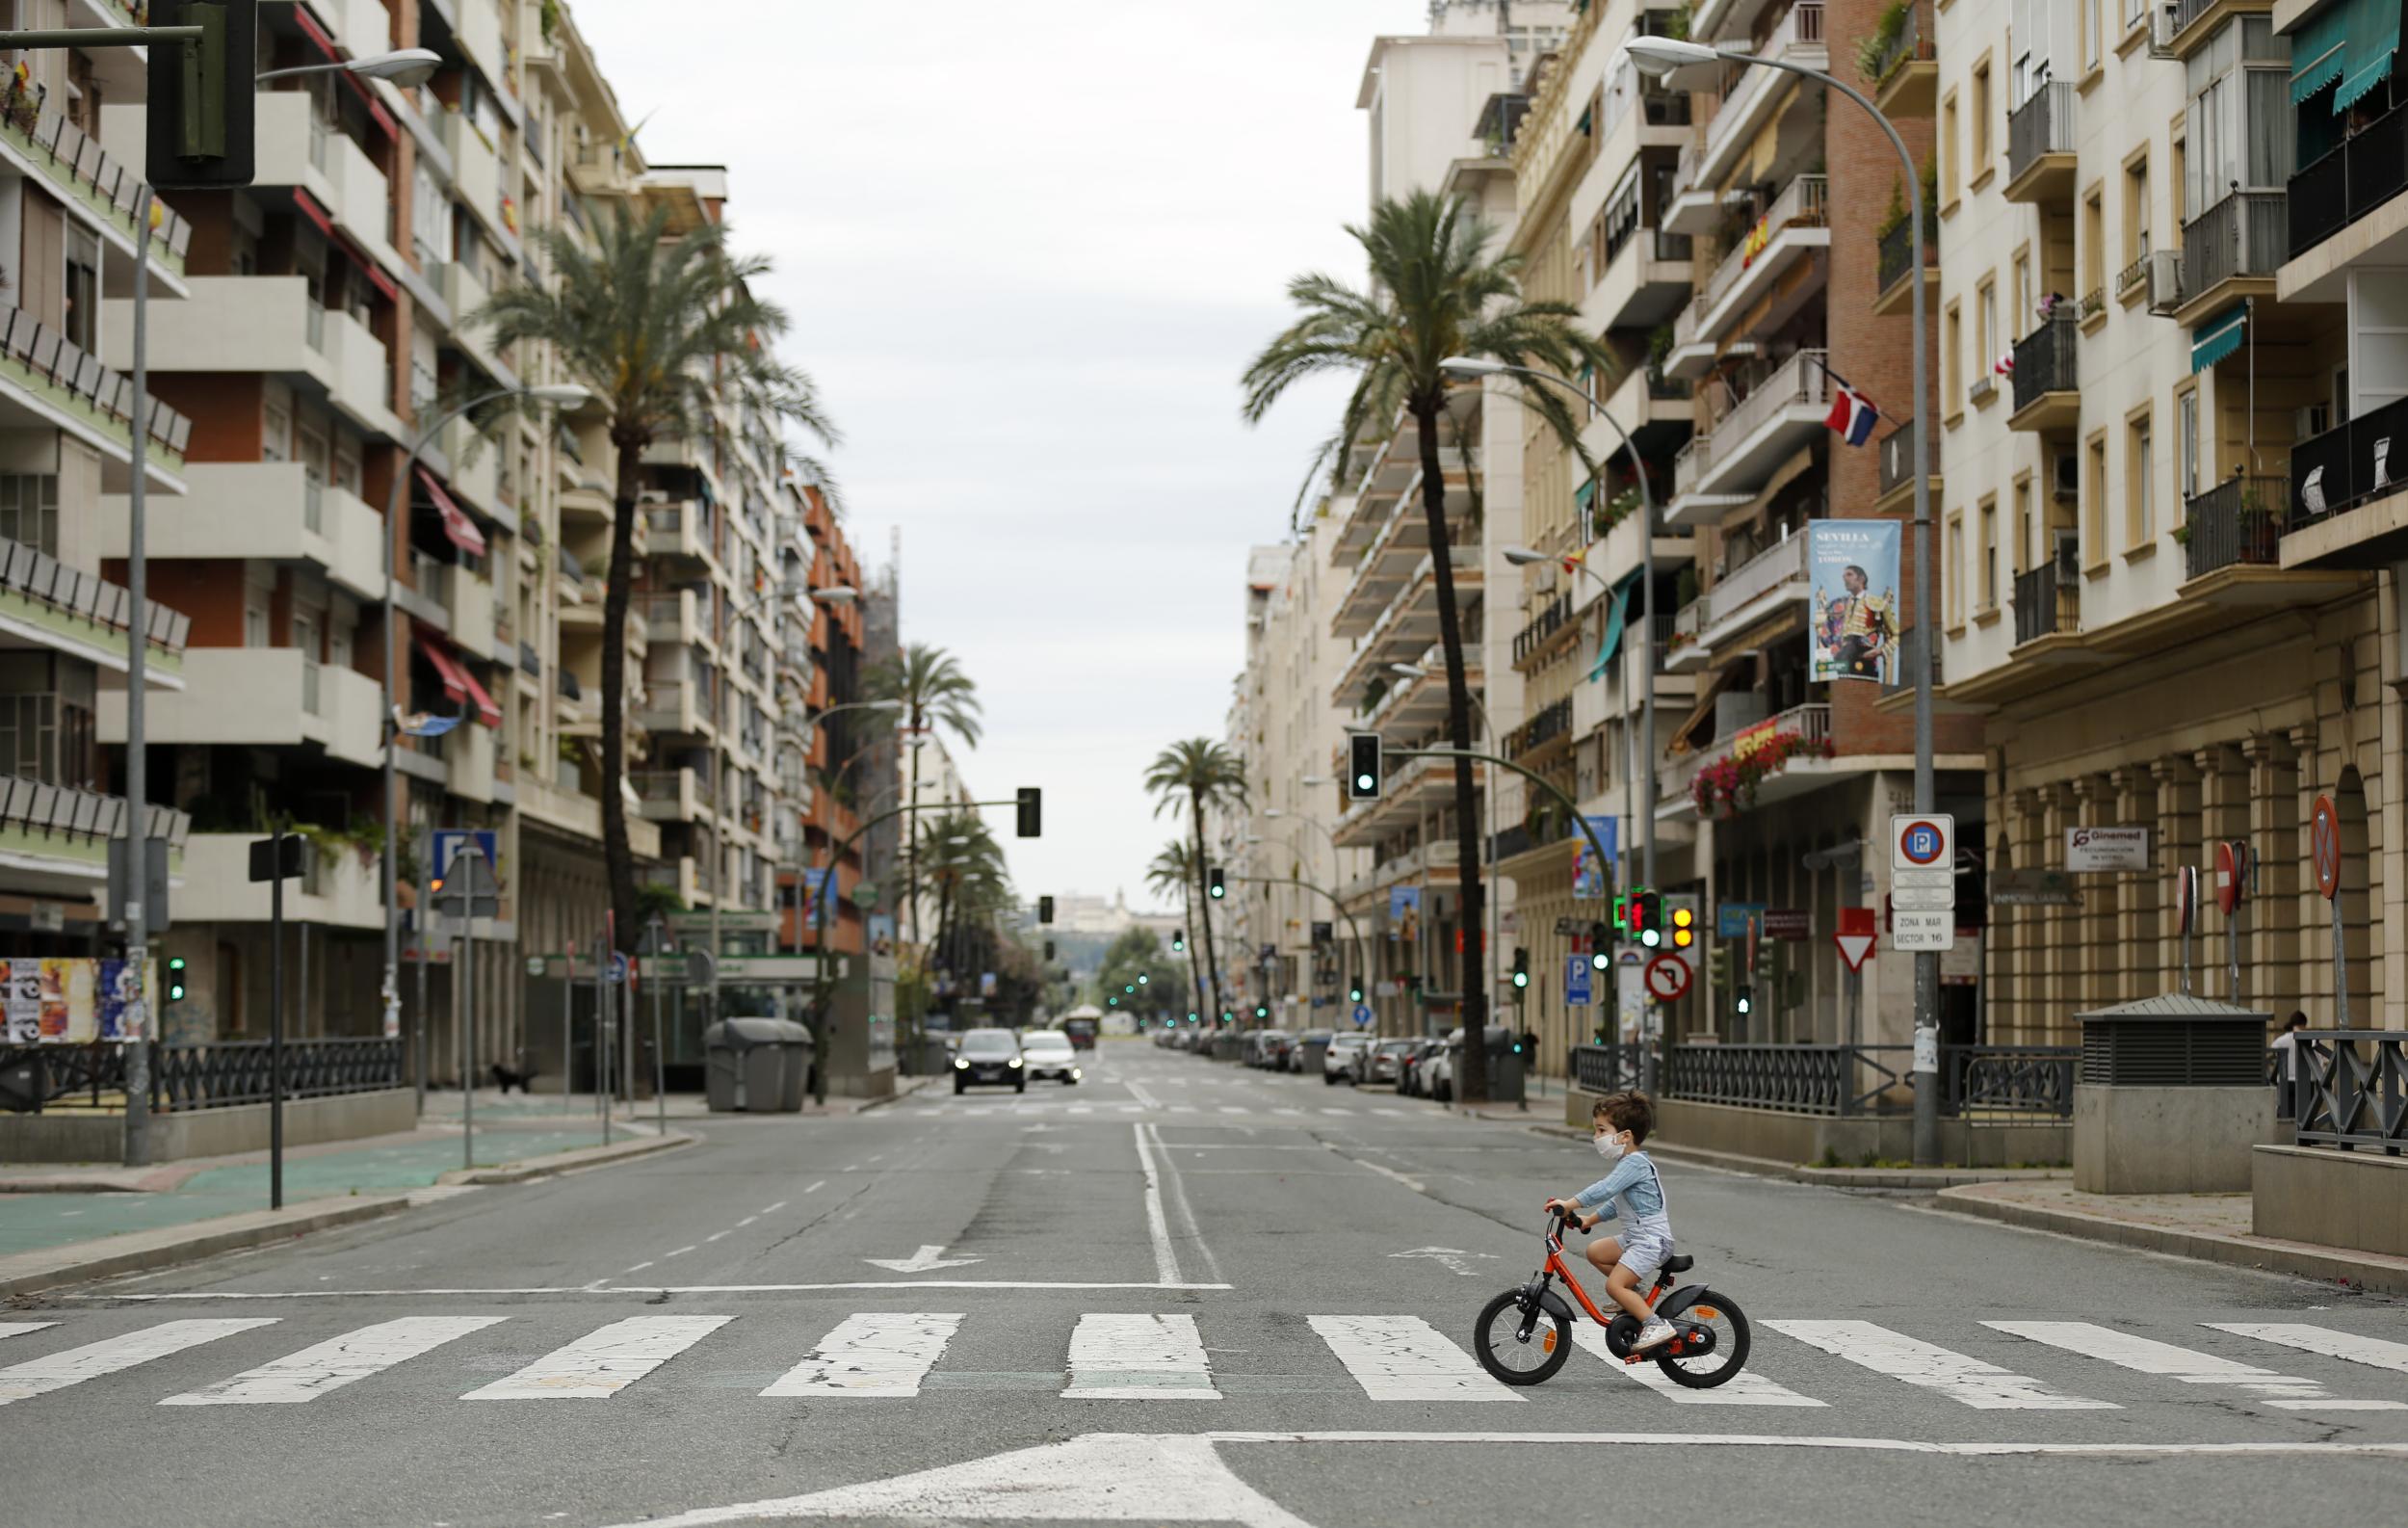 Some countries, like Spain (pictured), have eased restrictions, letting children play outside